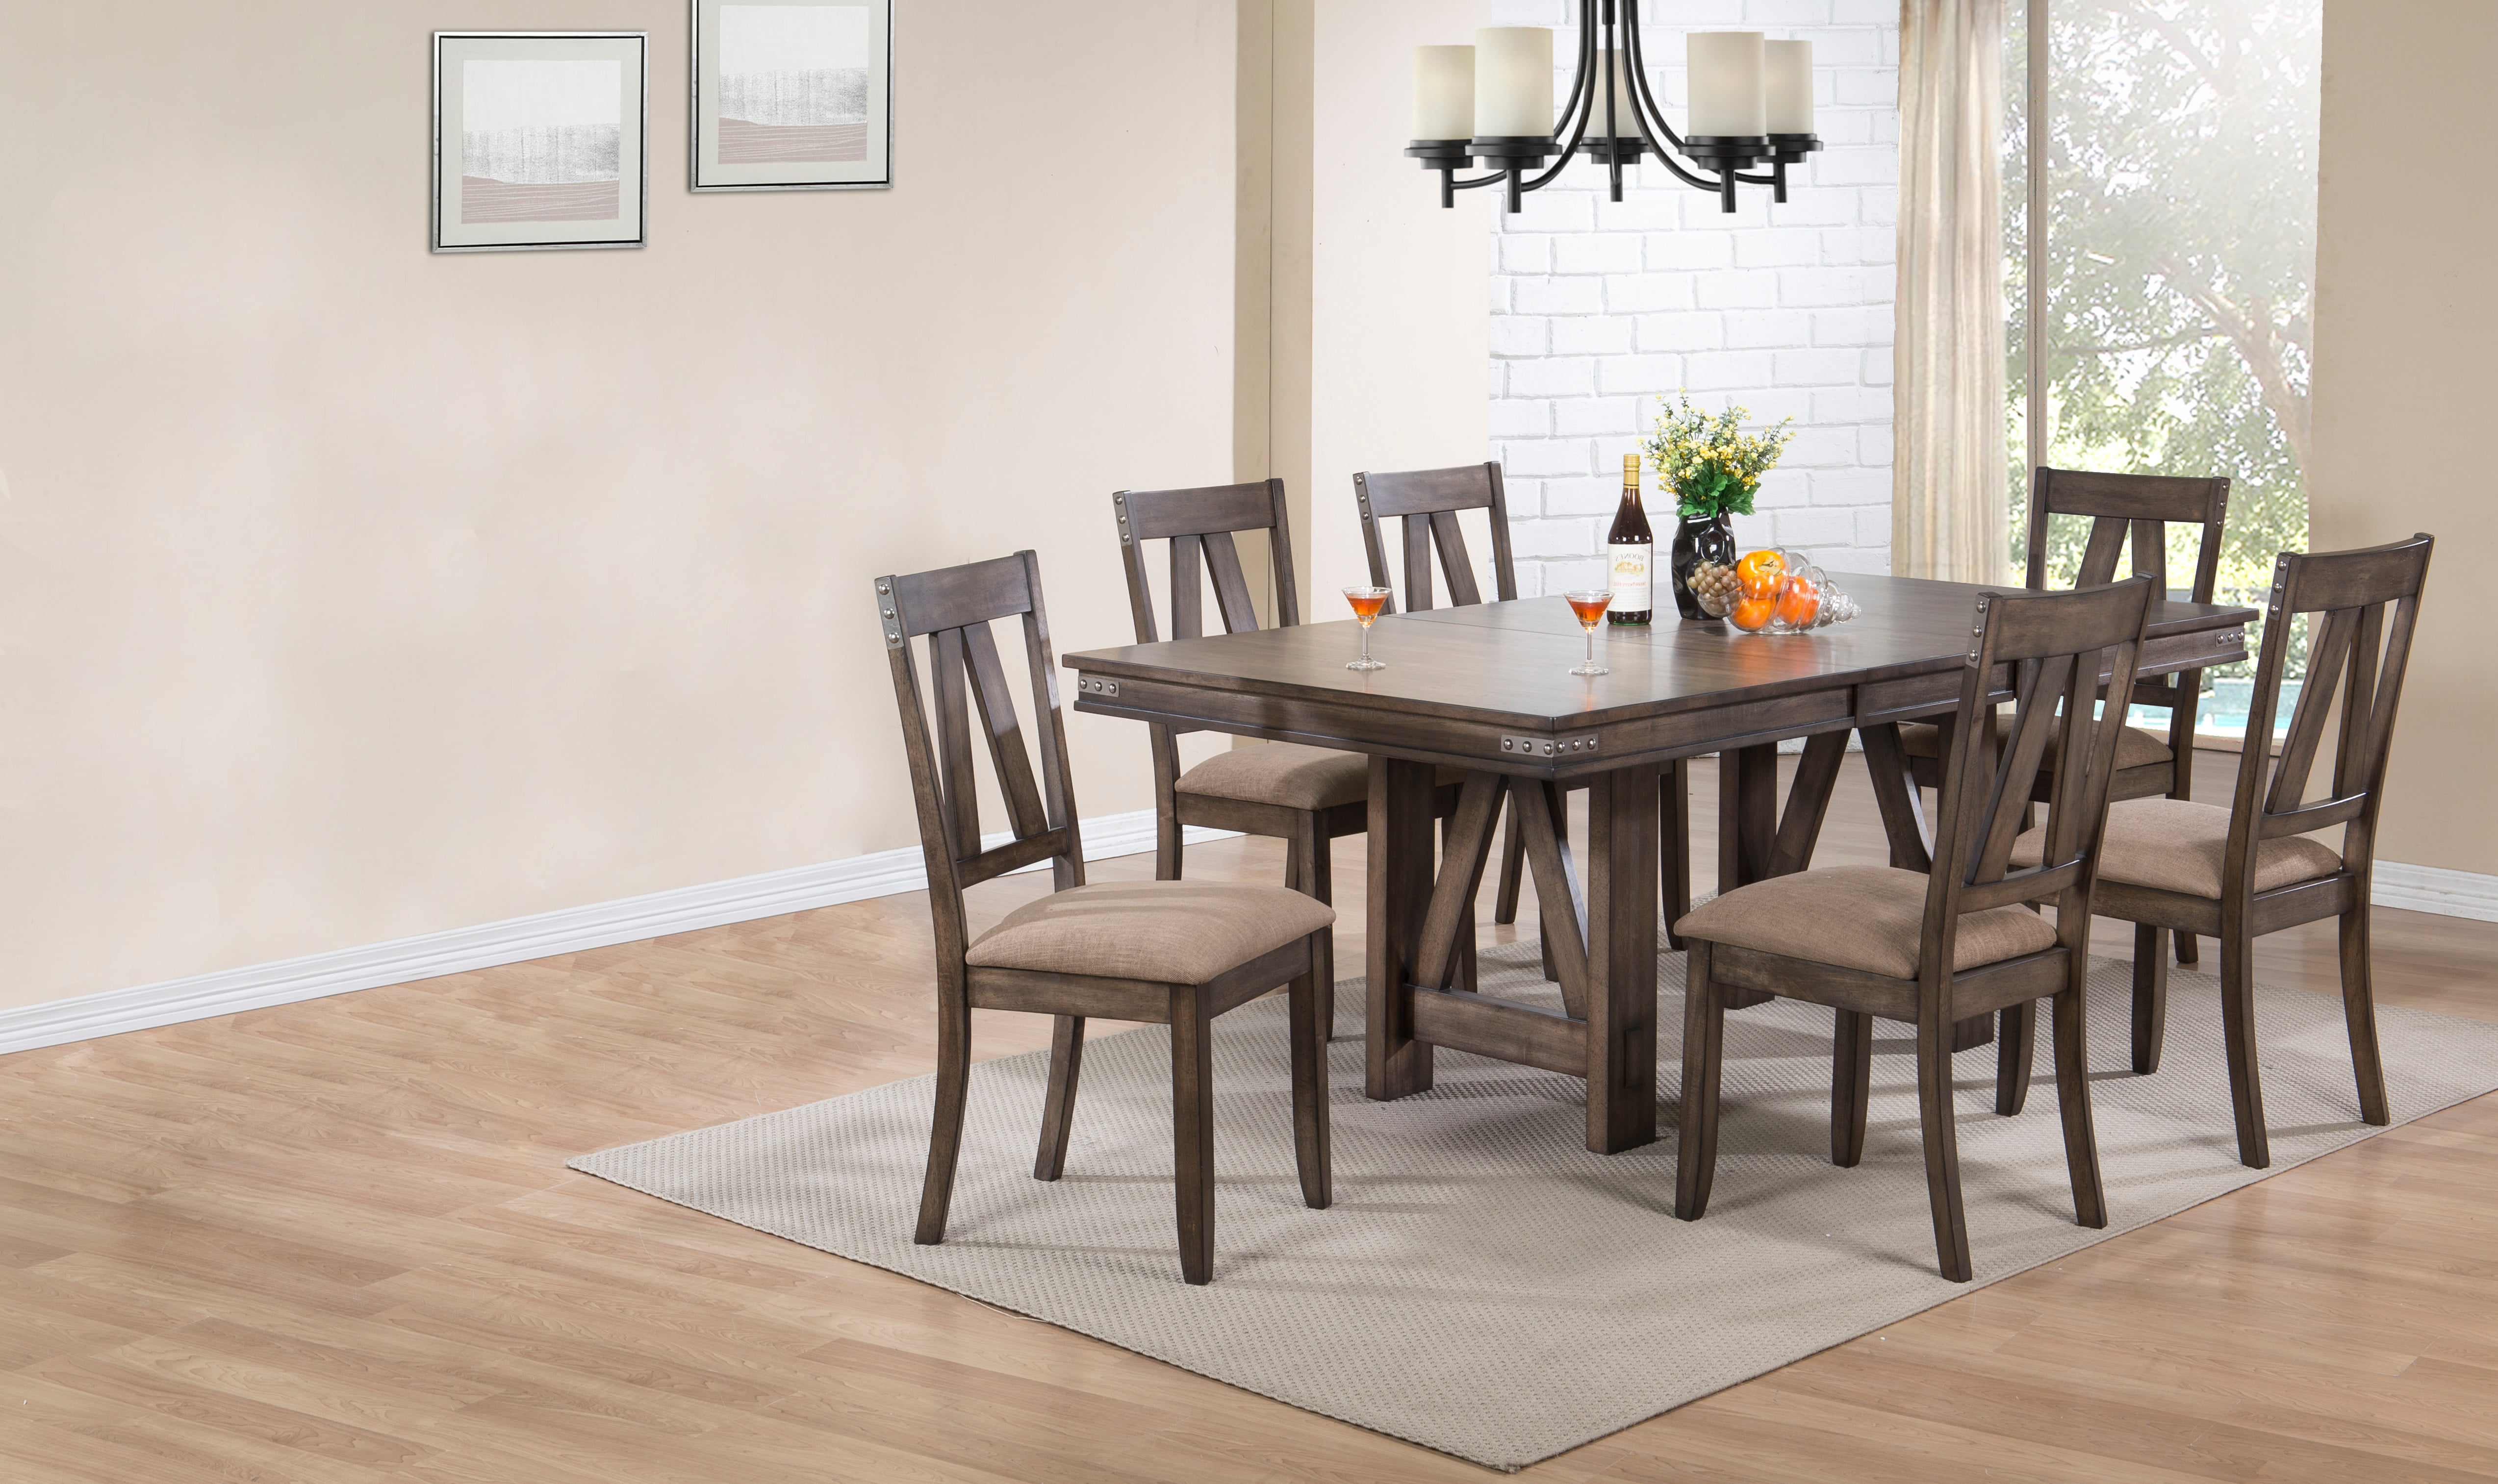 Nets 7 Piece Formal Dining Room Set, Brown Wood, Transitional (Table ...